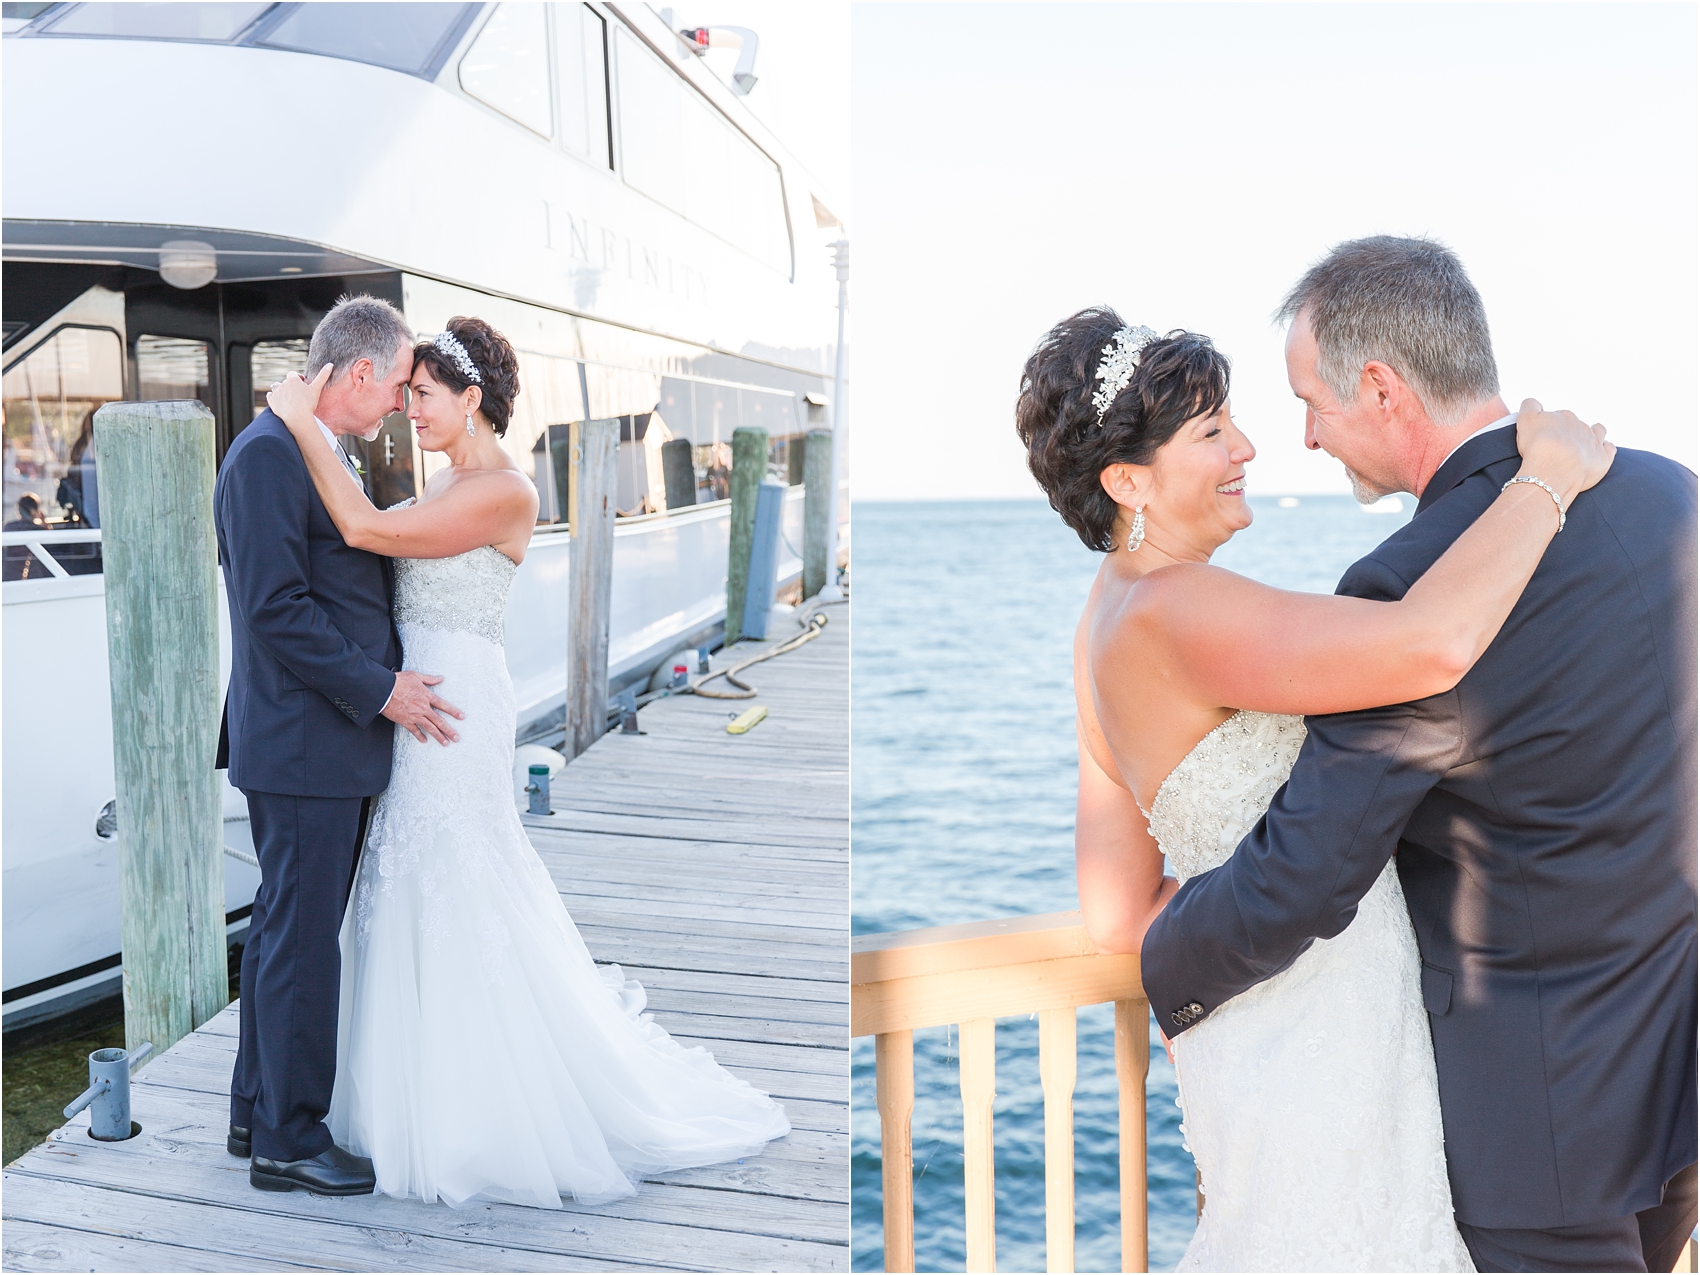 classic-natuical-inspired-wedding-photos-on-infinity-ovation-yacht-in-st-clair-shores-mi-by-courtney-carolyn-photography_0068.jpg